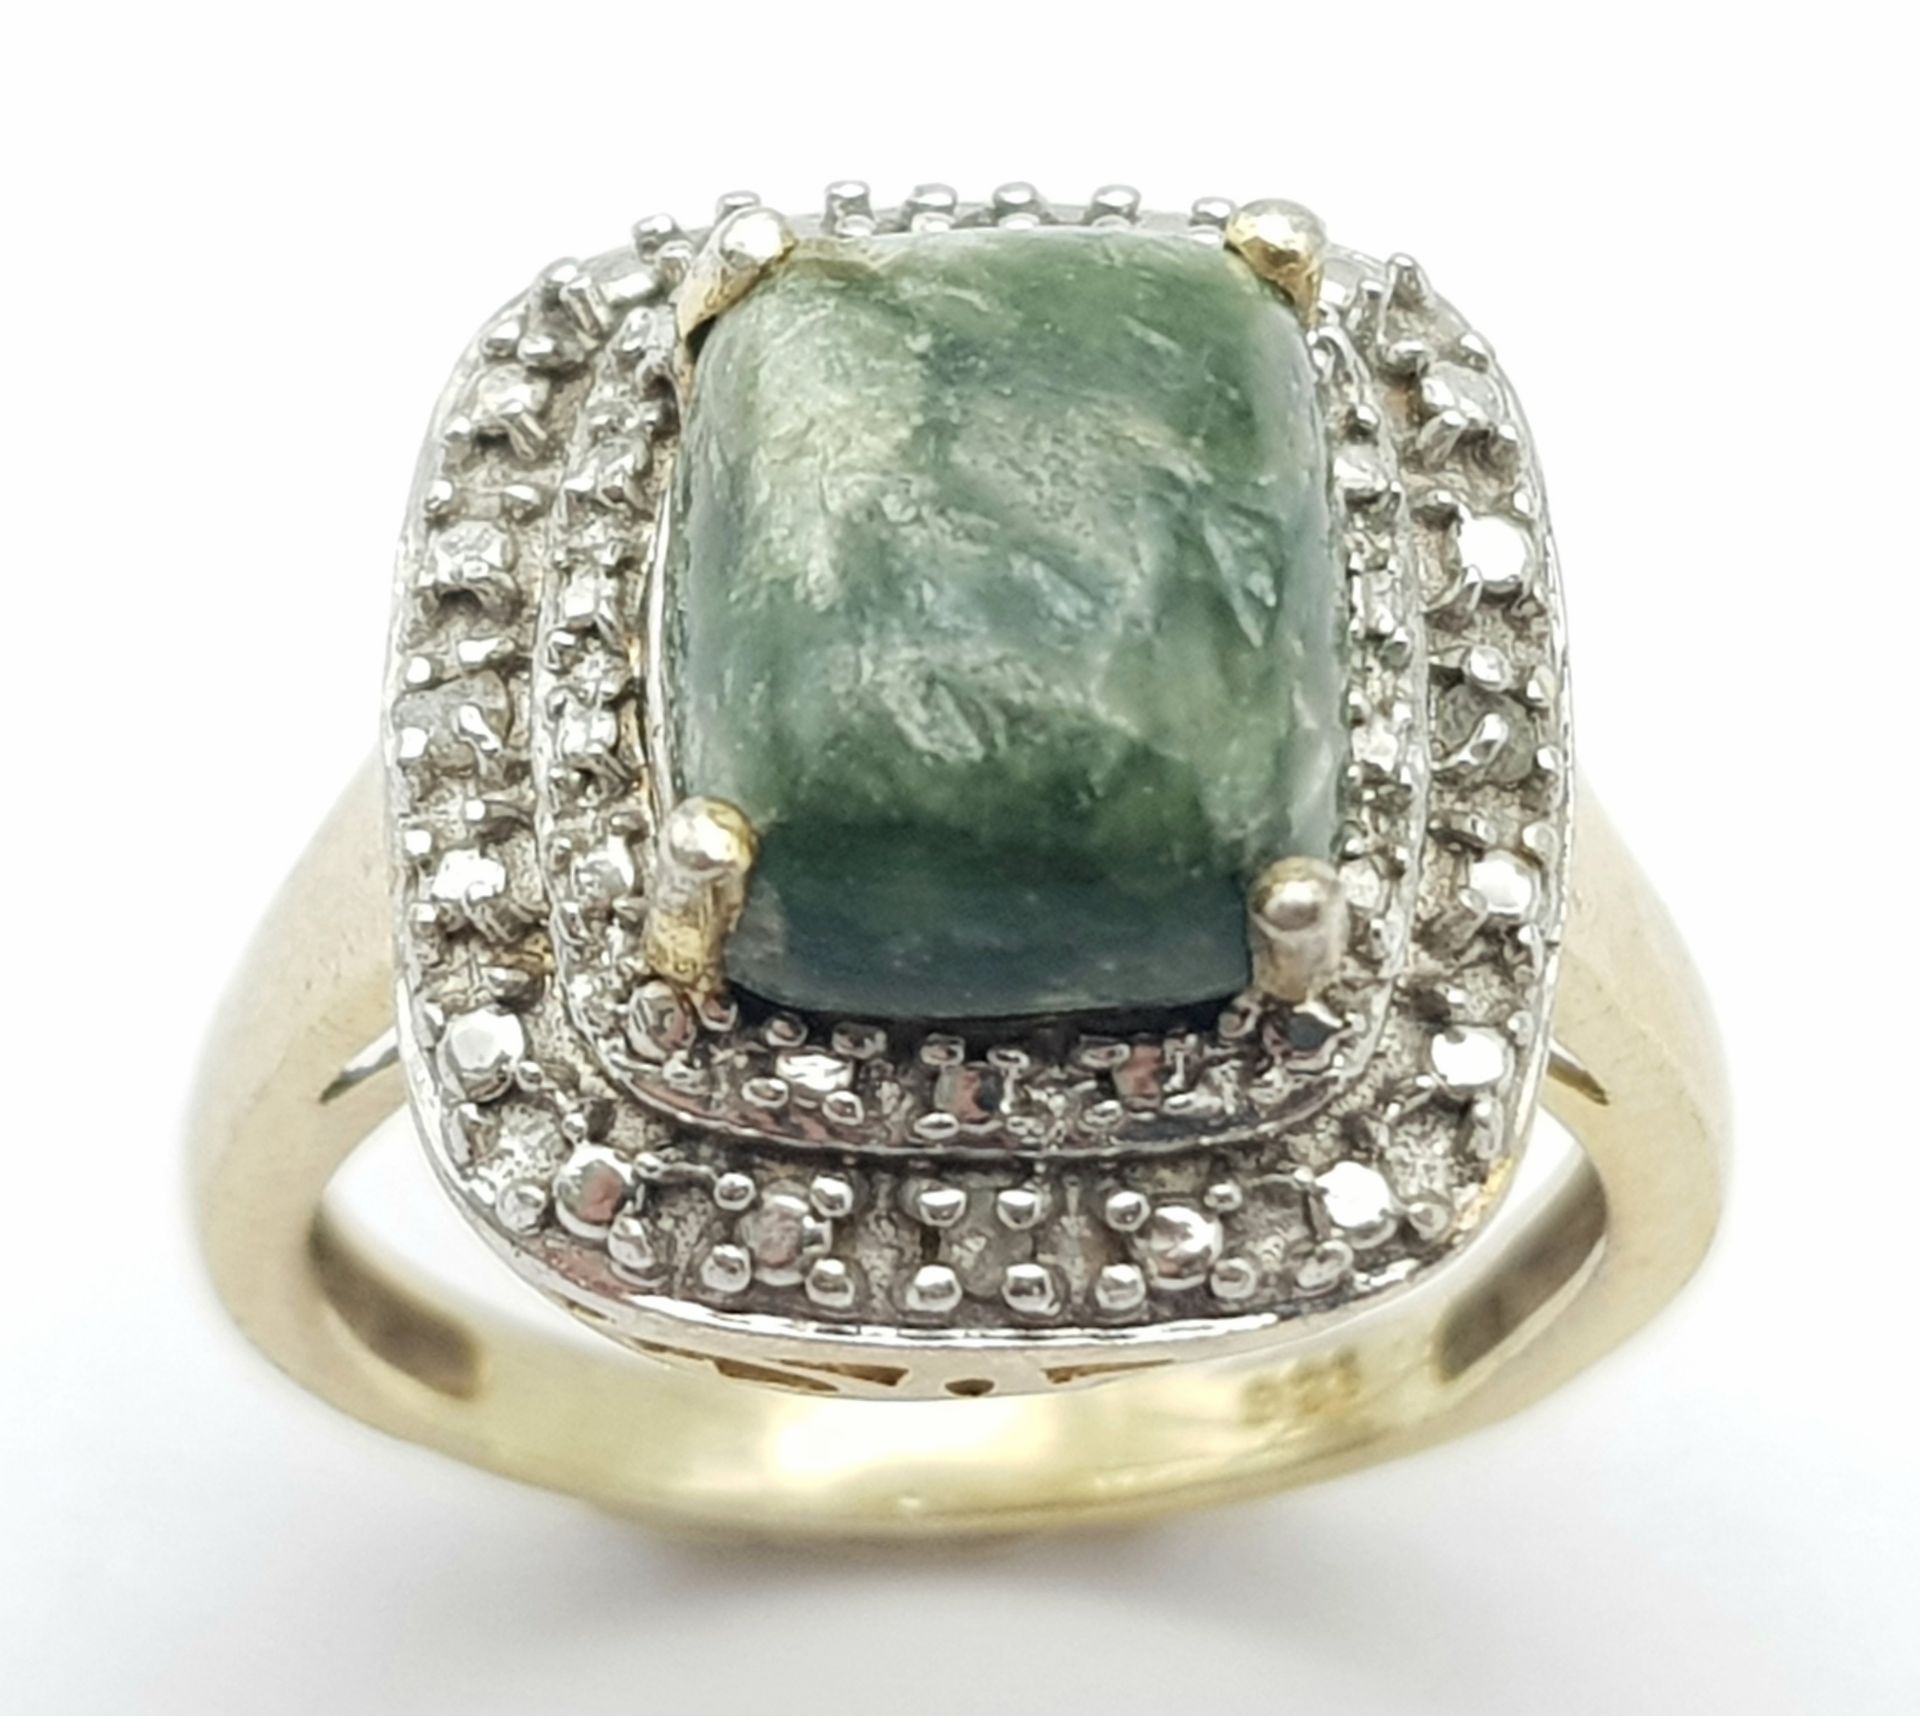 A Vintage Yellow Gold Gilt Sterling Silver Russian Seraphinite and Diamond Tiered Set Ring Size N. - Image 2 of 5